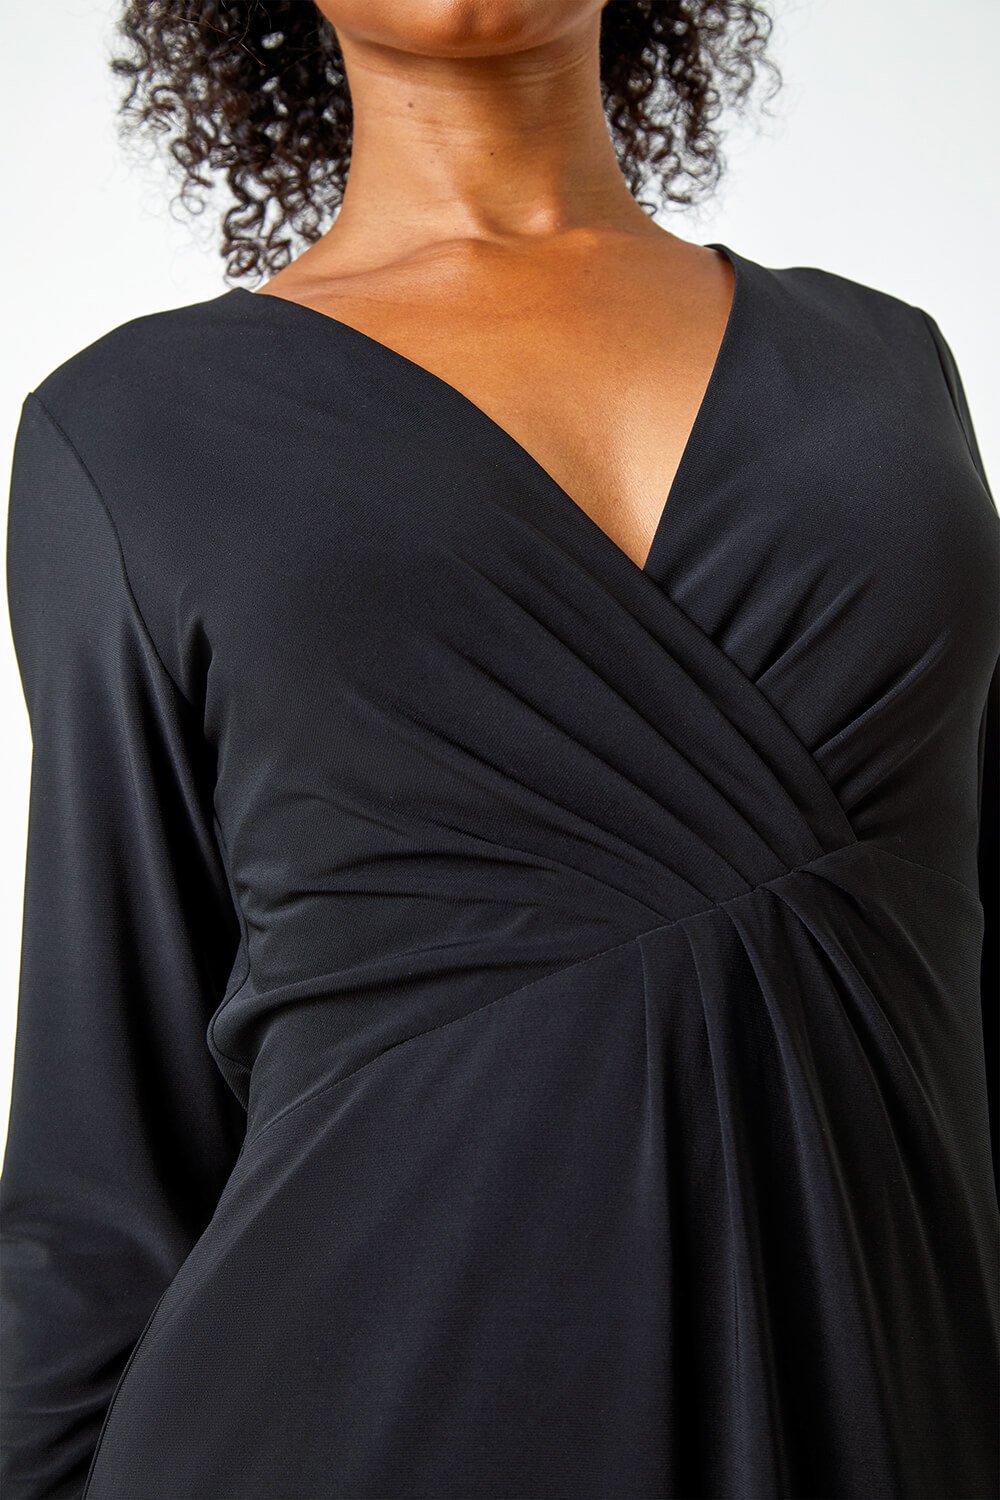 Black Petite Stretch Ruched Maxi Dress, Image 5 of 5